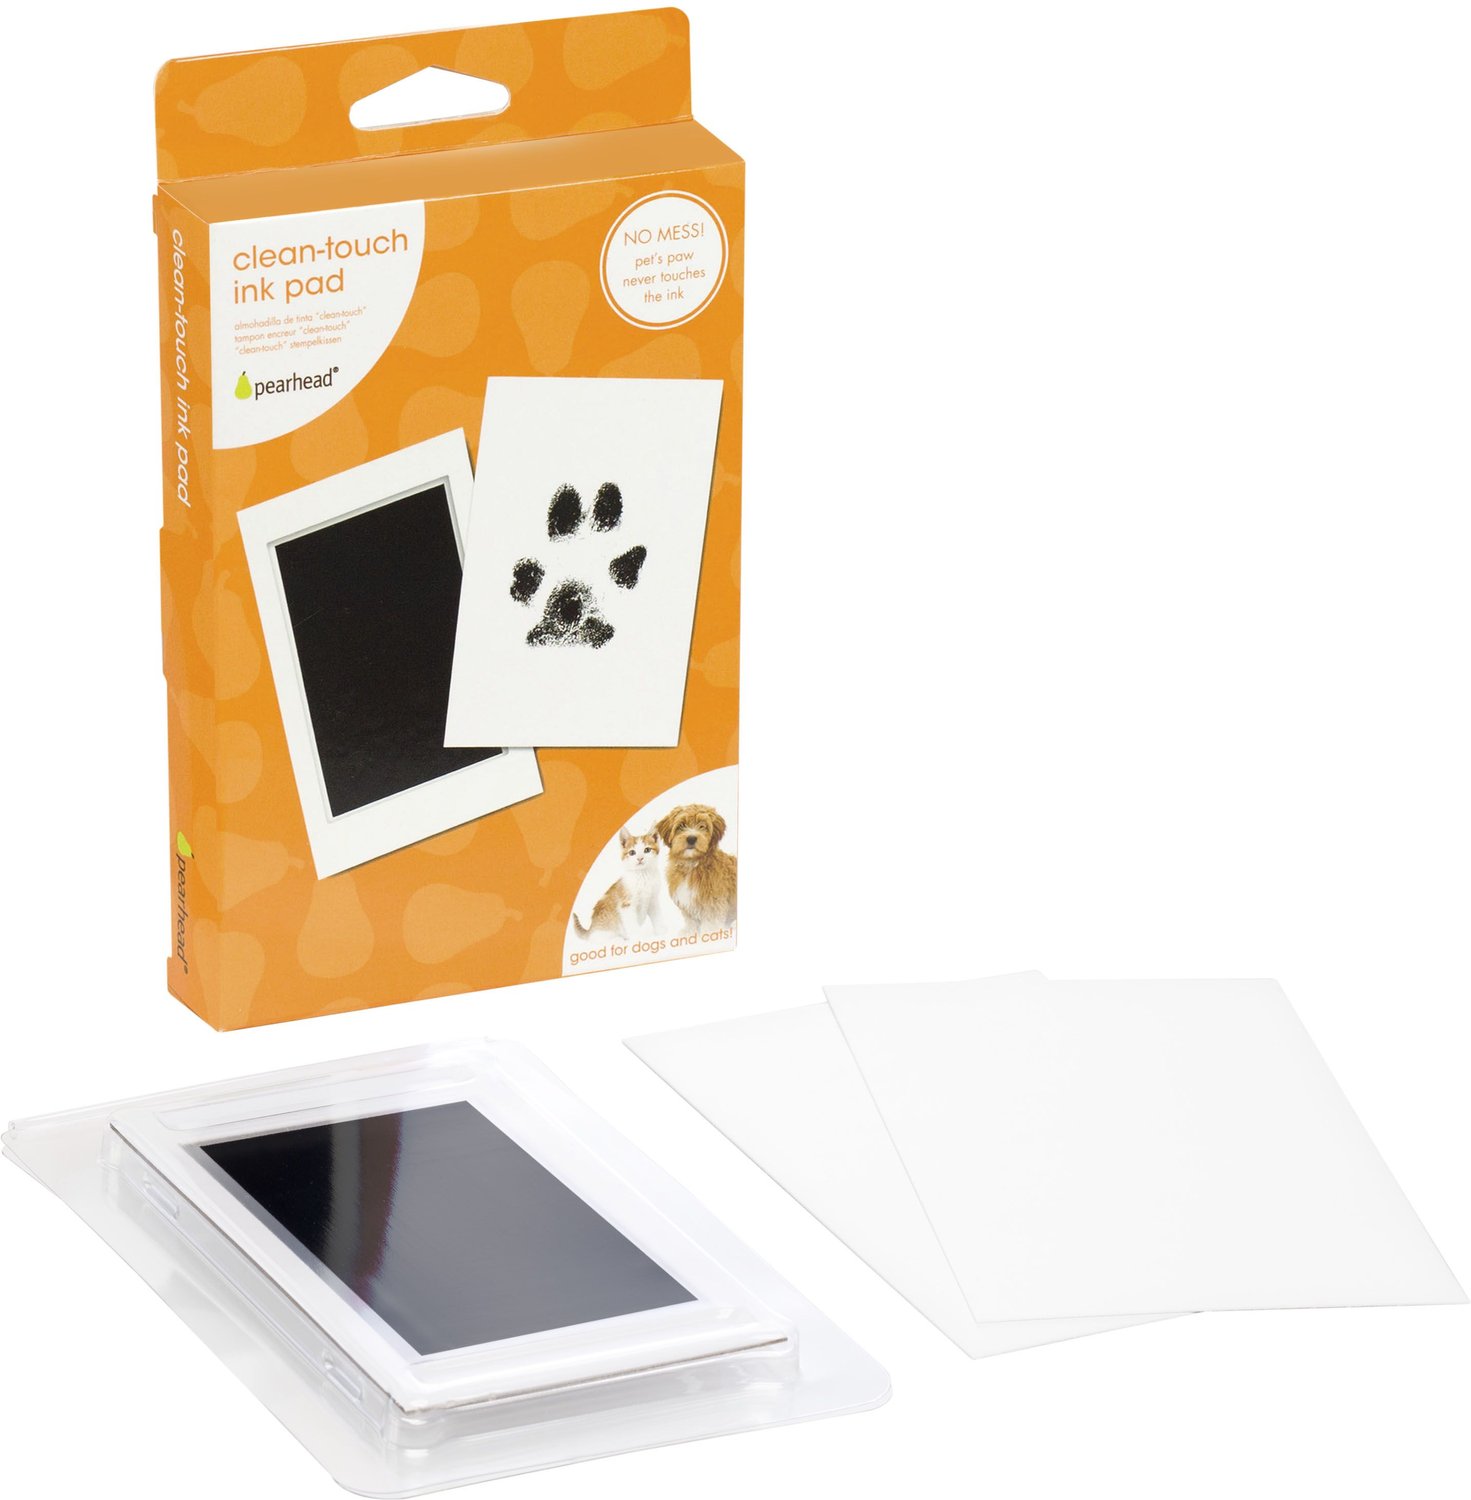 for Your 0-6 Months Baby,Small Cat and Dog Horoshop Handprint and Footprint Ink Pads,Pet Paw Print Clean Touch Ink Pad Non-Toxic Ink Black 